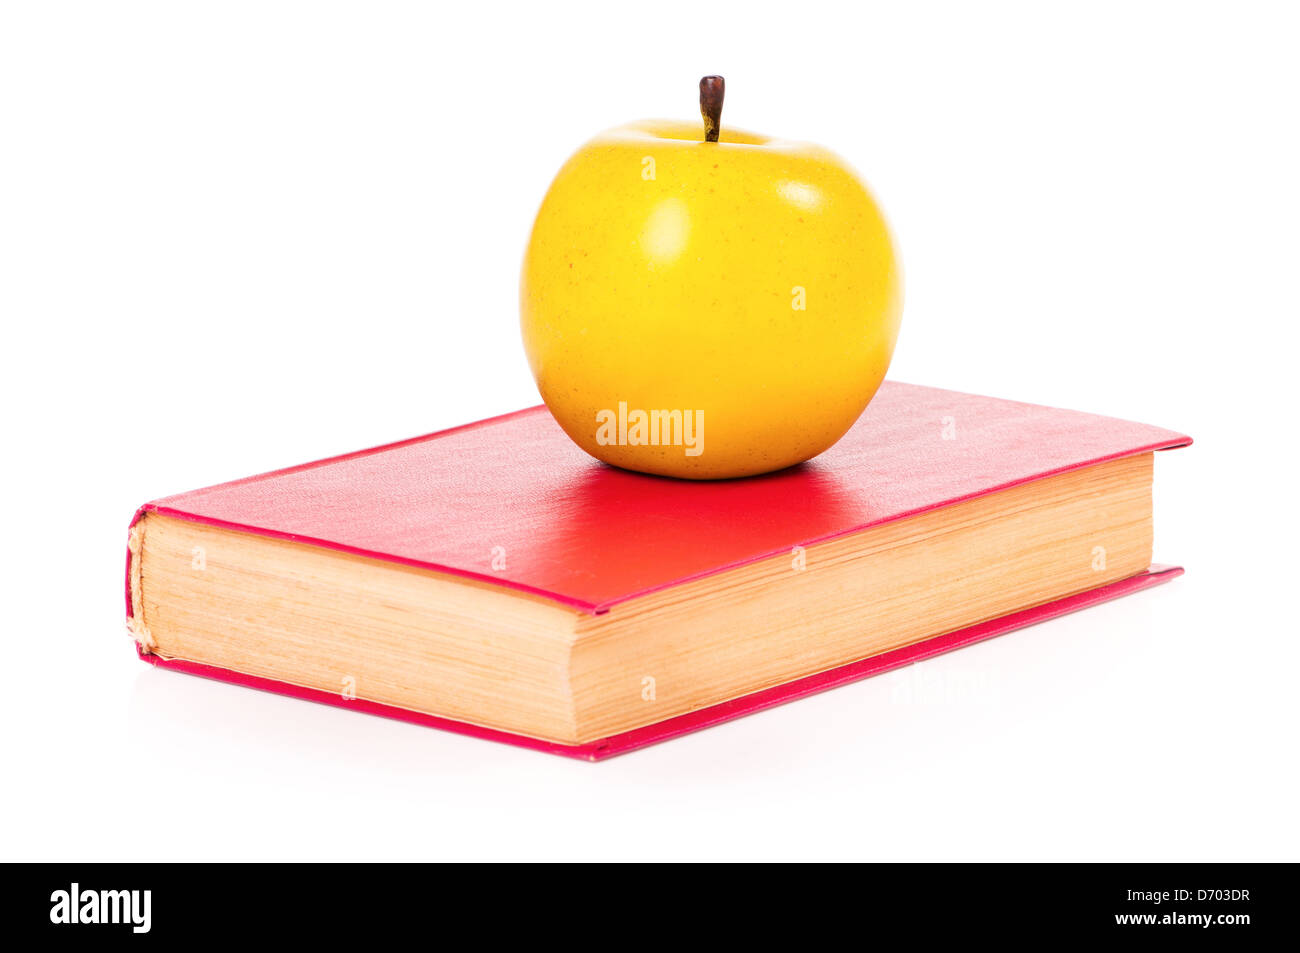 Book with apple Stock Photo